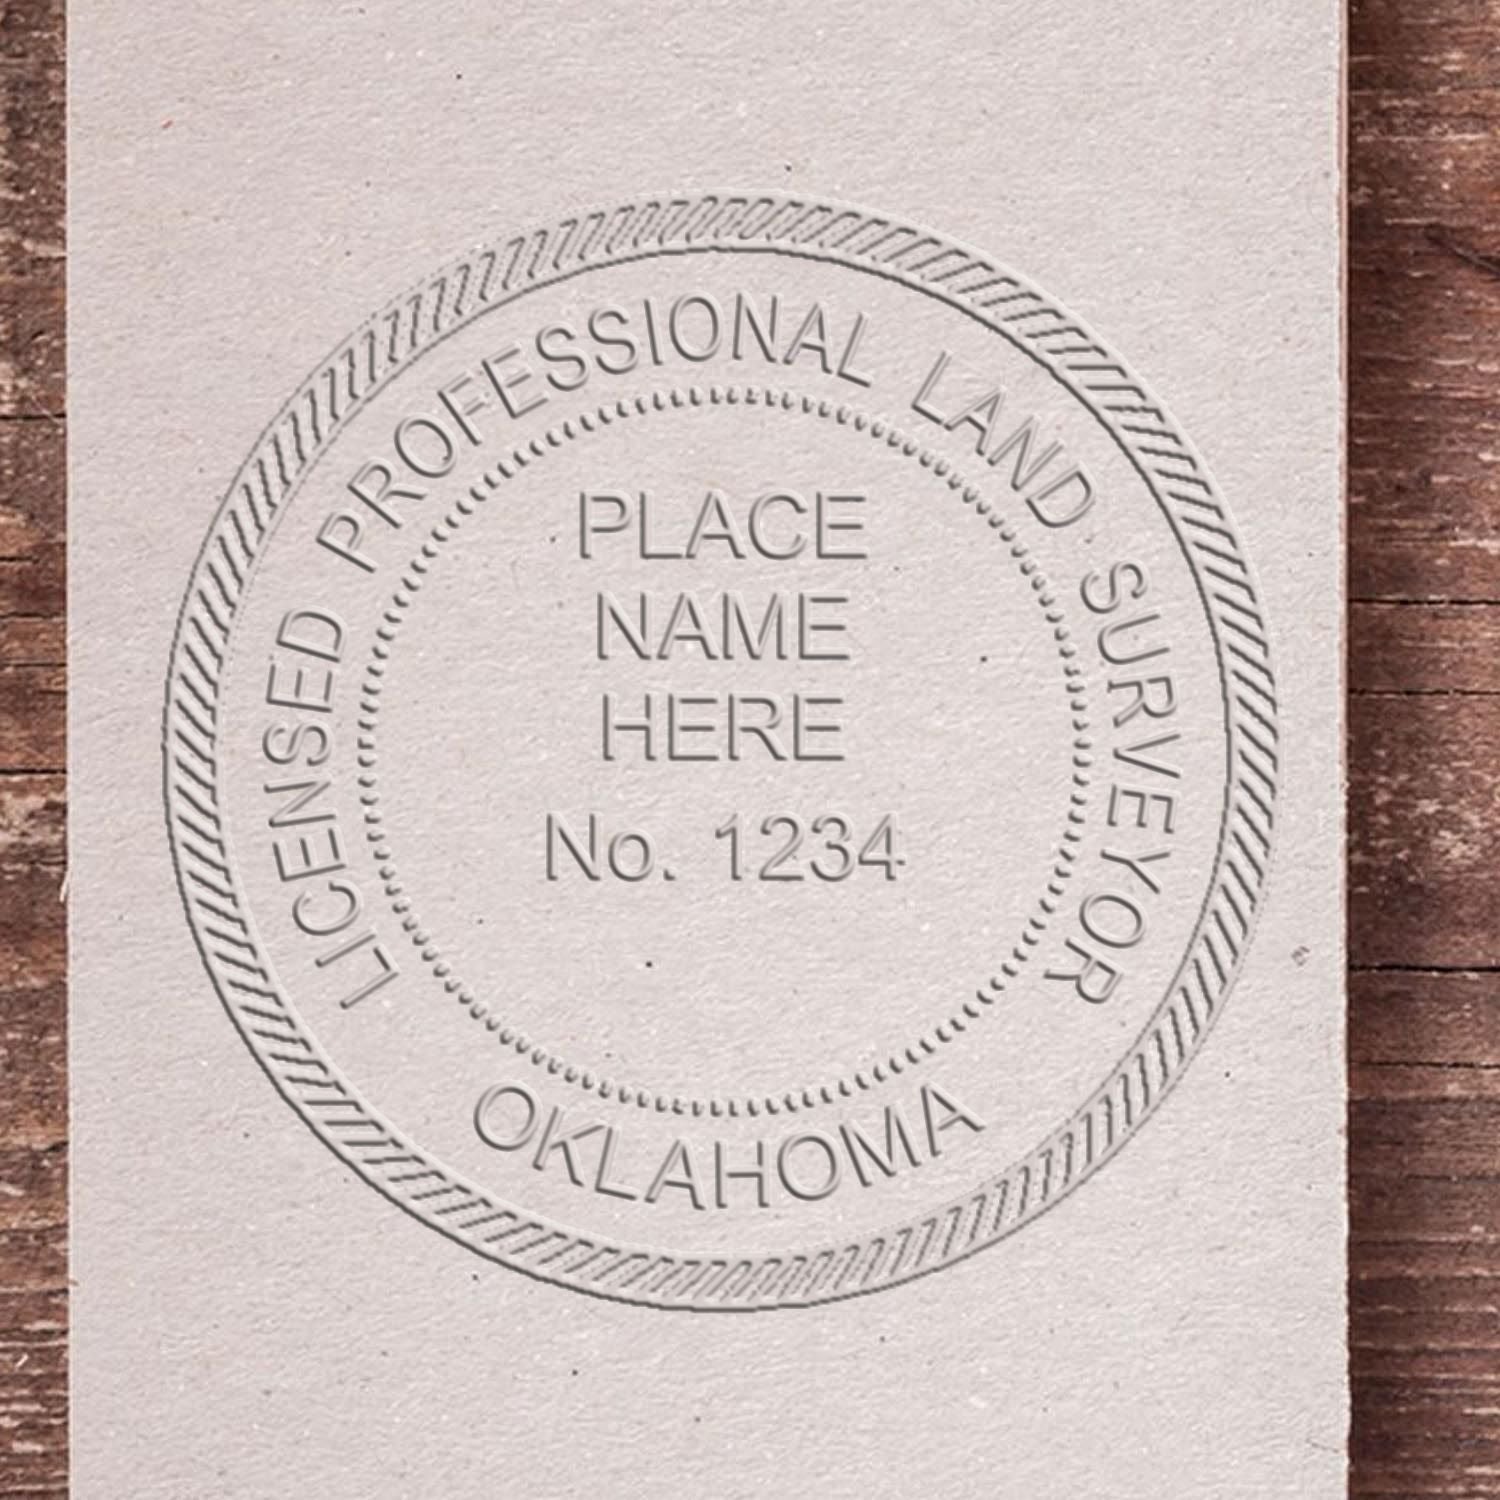 A lifestyle photo showing a stamped image of the Handheld Oklahoma Land Surveyor Seal on a piece of paper